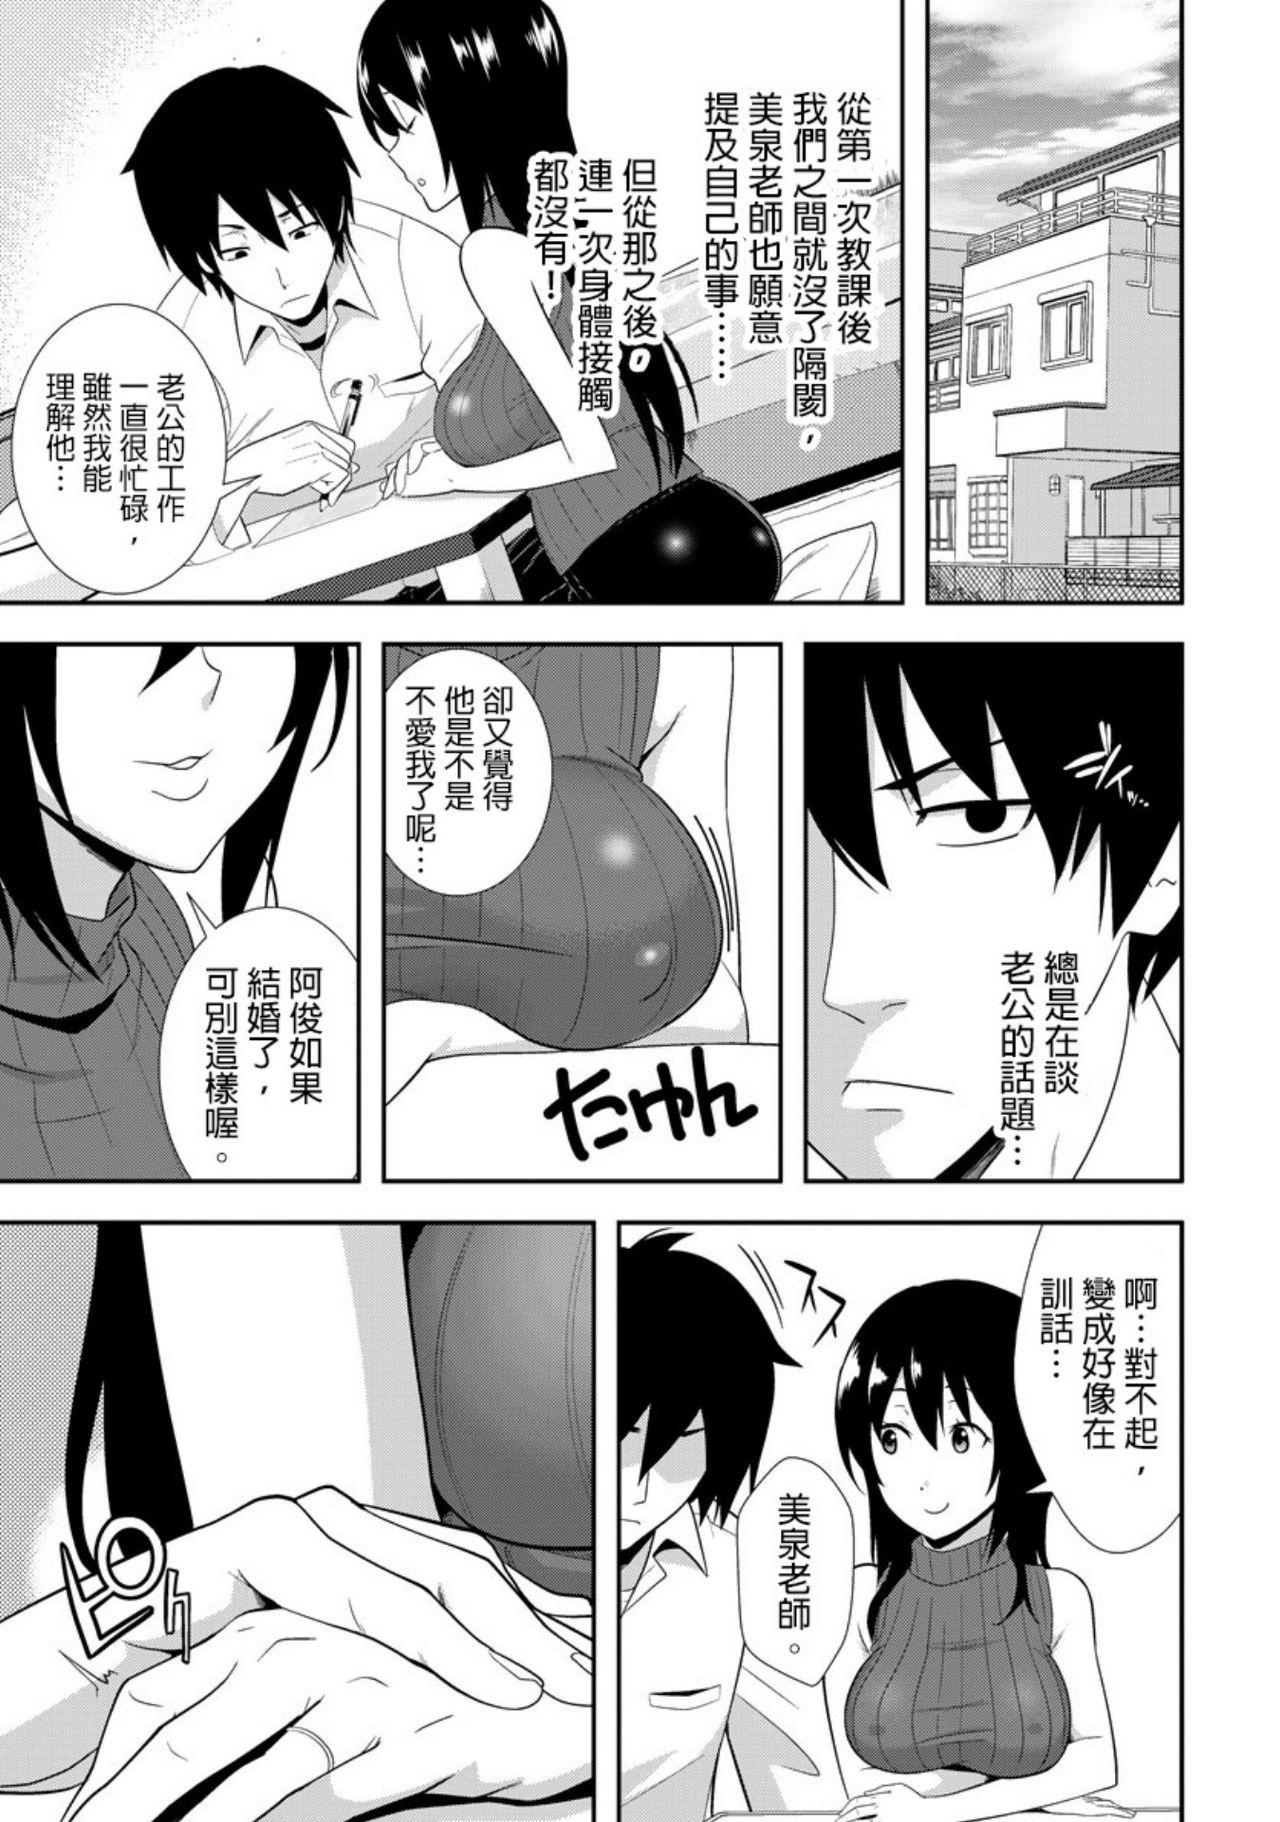 Dorm 教え子に襲ワレル人妻は抵抗できなくて Ch.1 Bedroom - Page 6